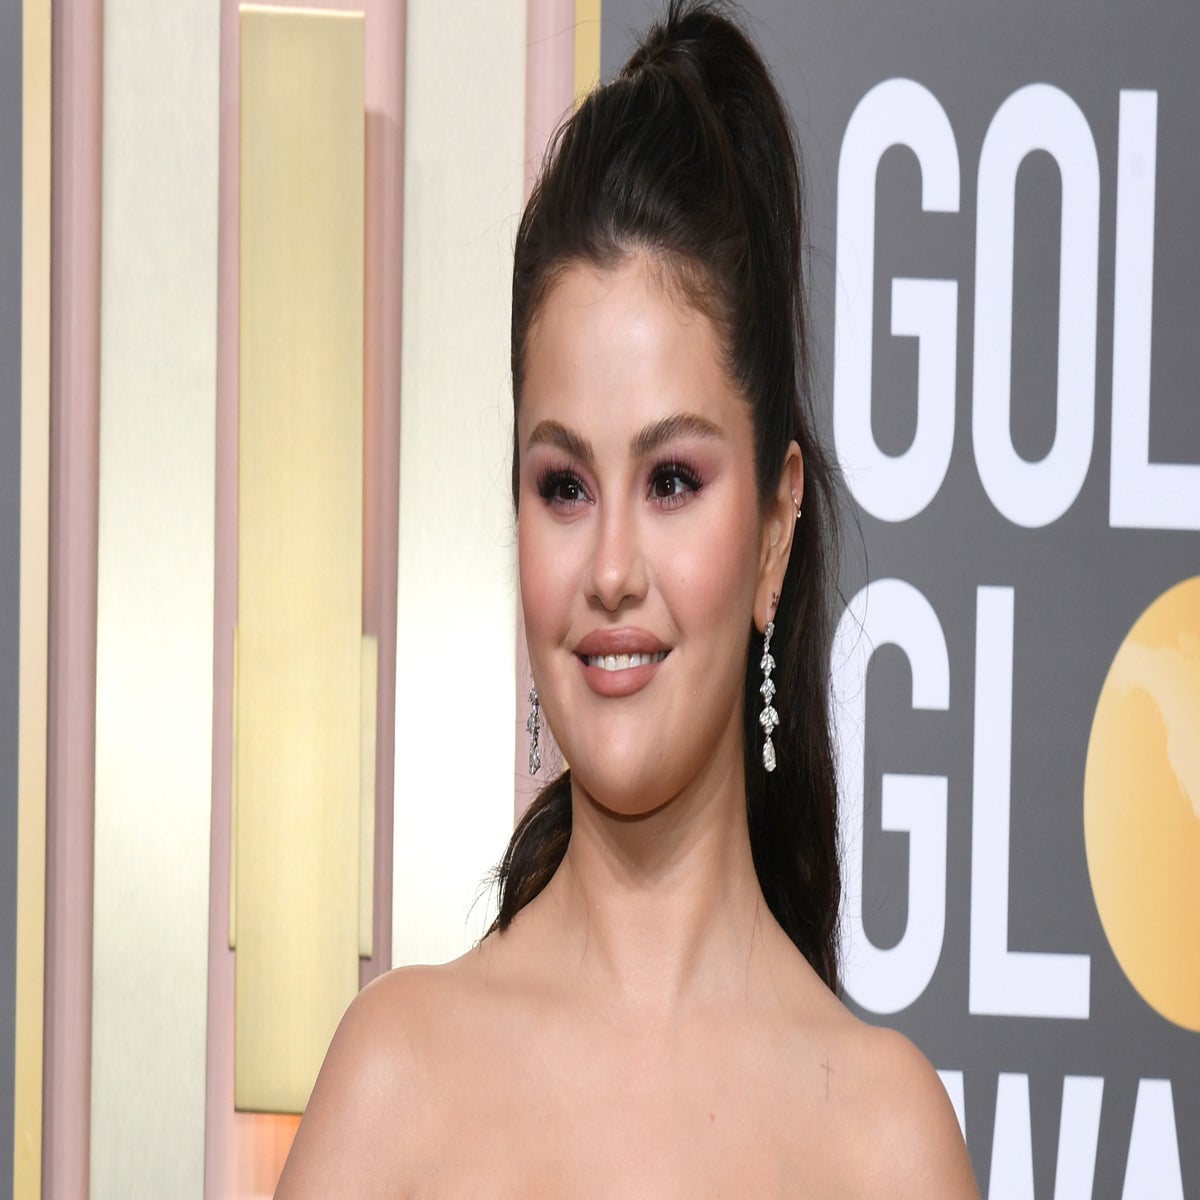 Selena Gomez Video Sex - Selena Gomez appears to mock body-shamers after Golden Globes appearance |  The Independent